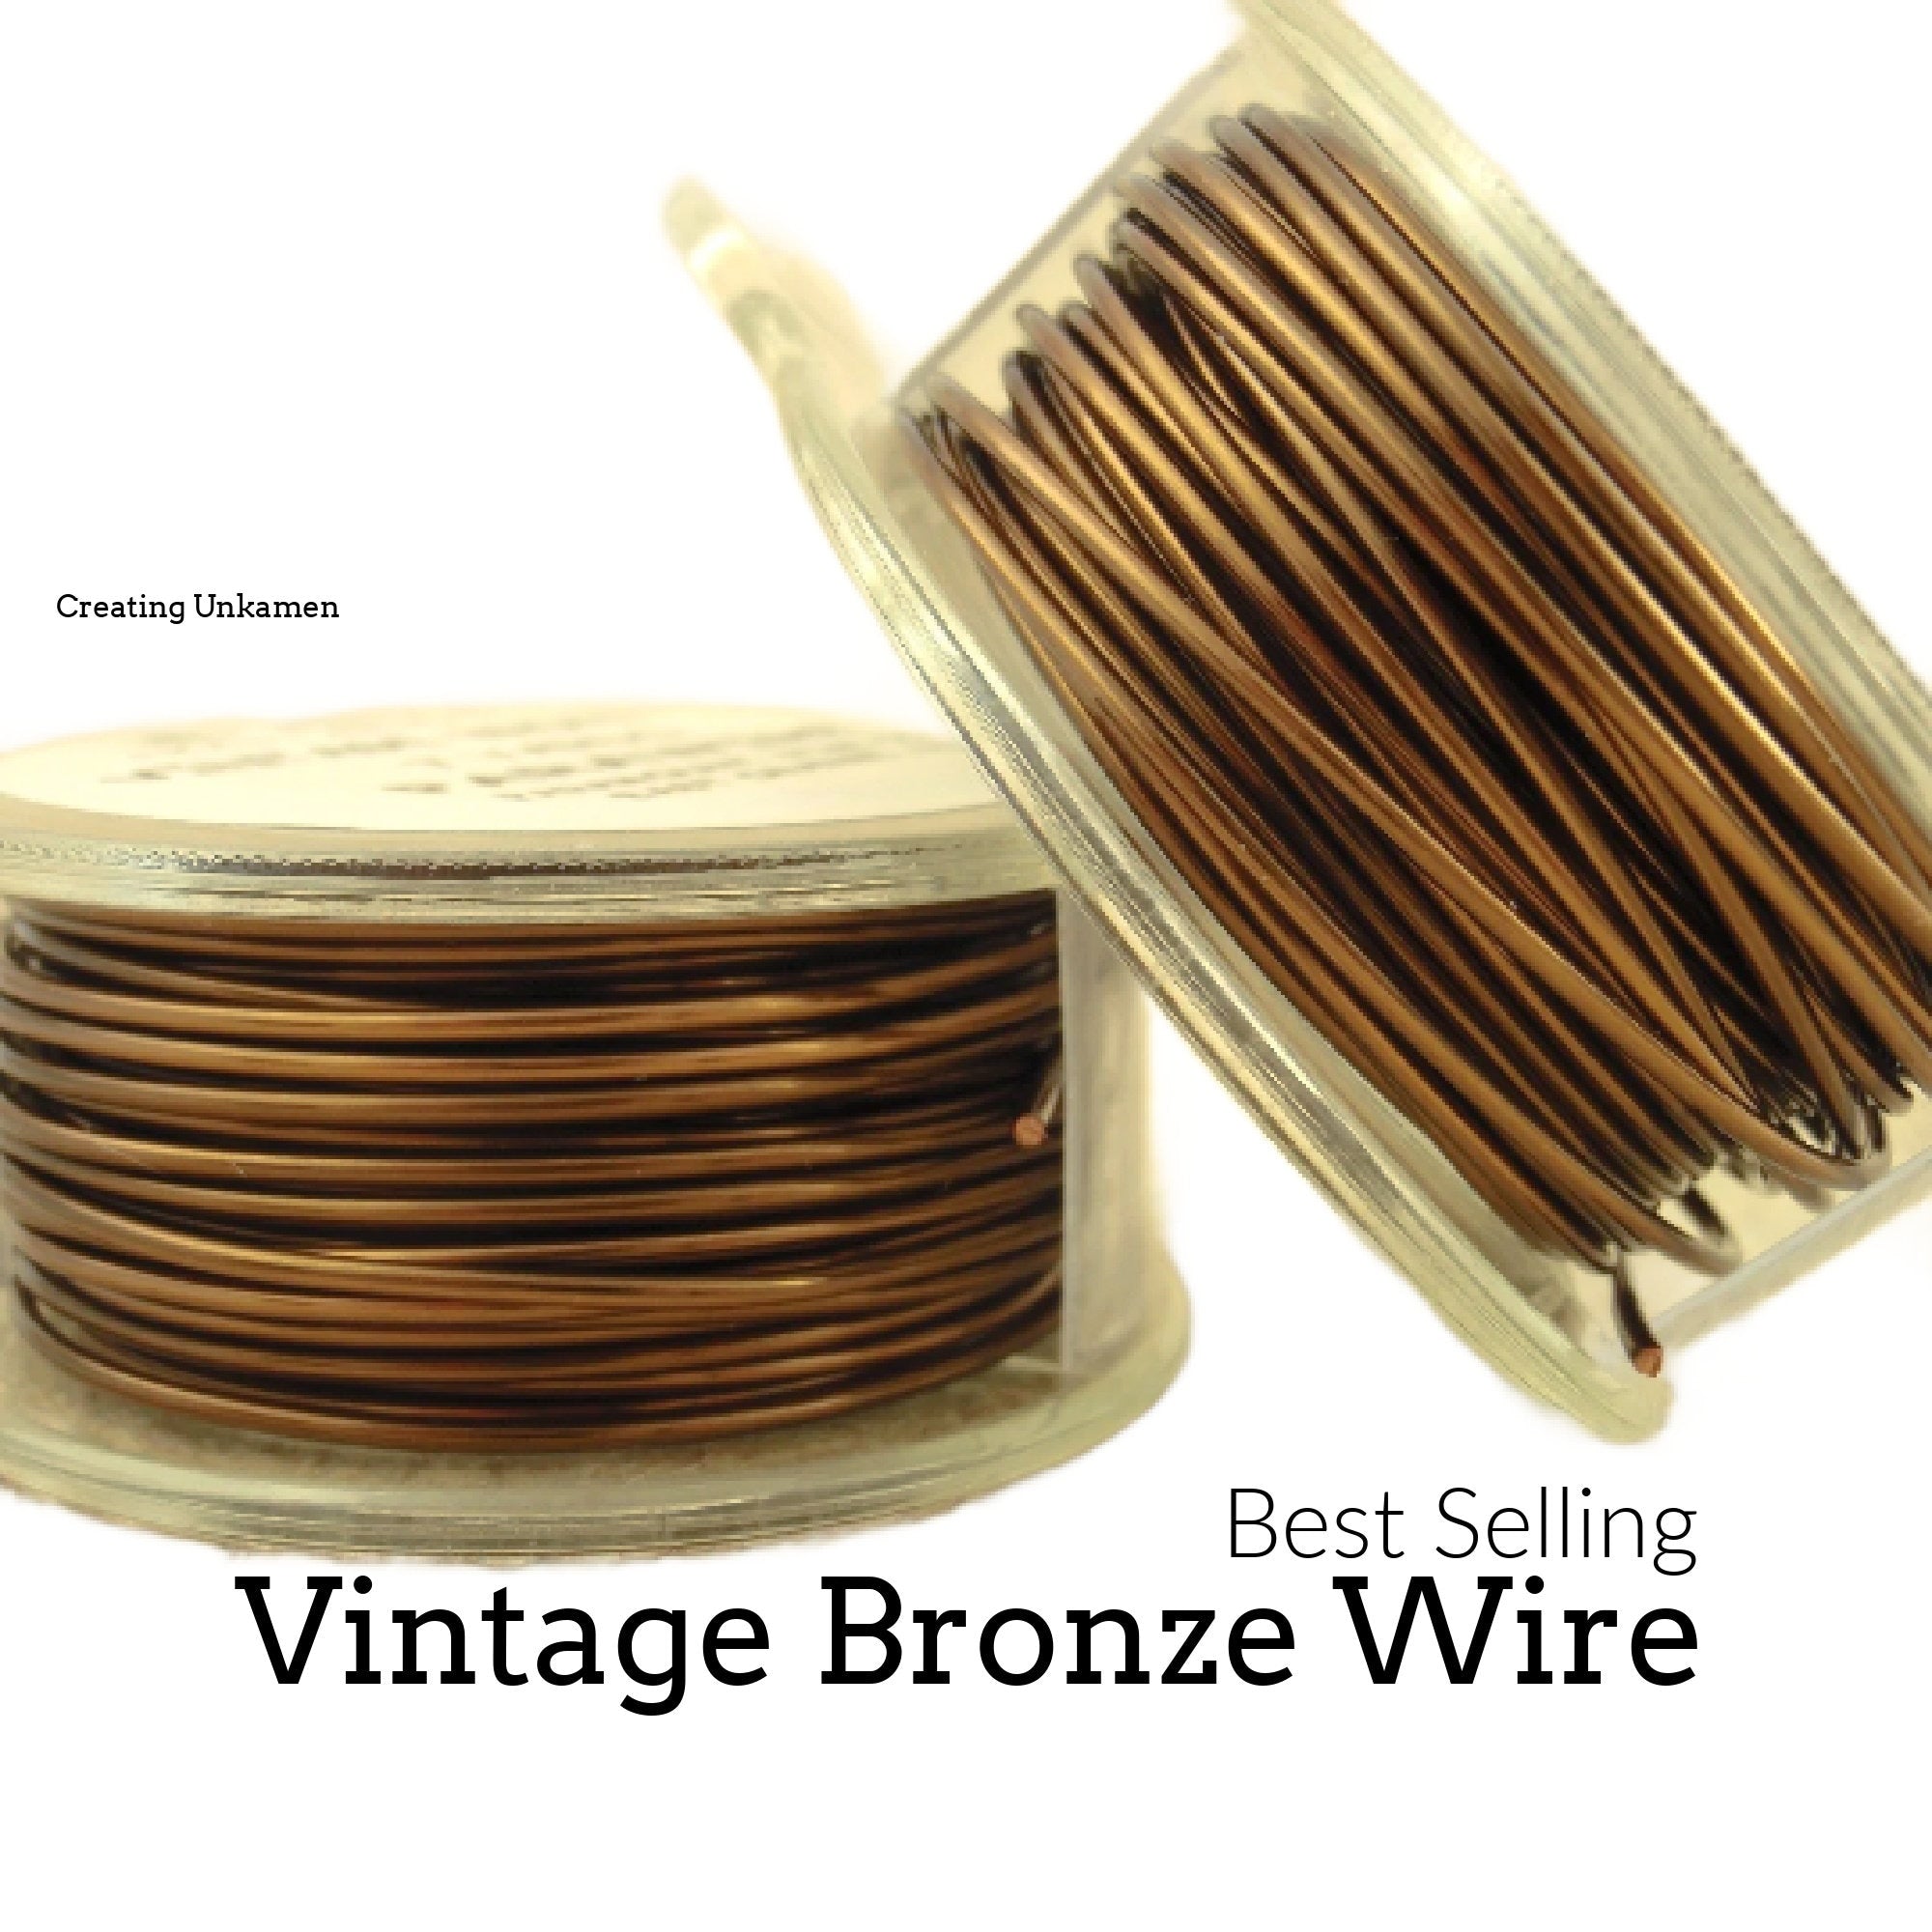 Vintage Bronze Wire - Enameled Coated Copper - 100% Guarantee